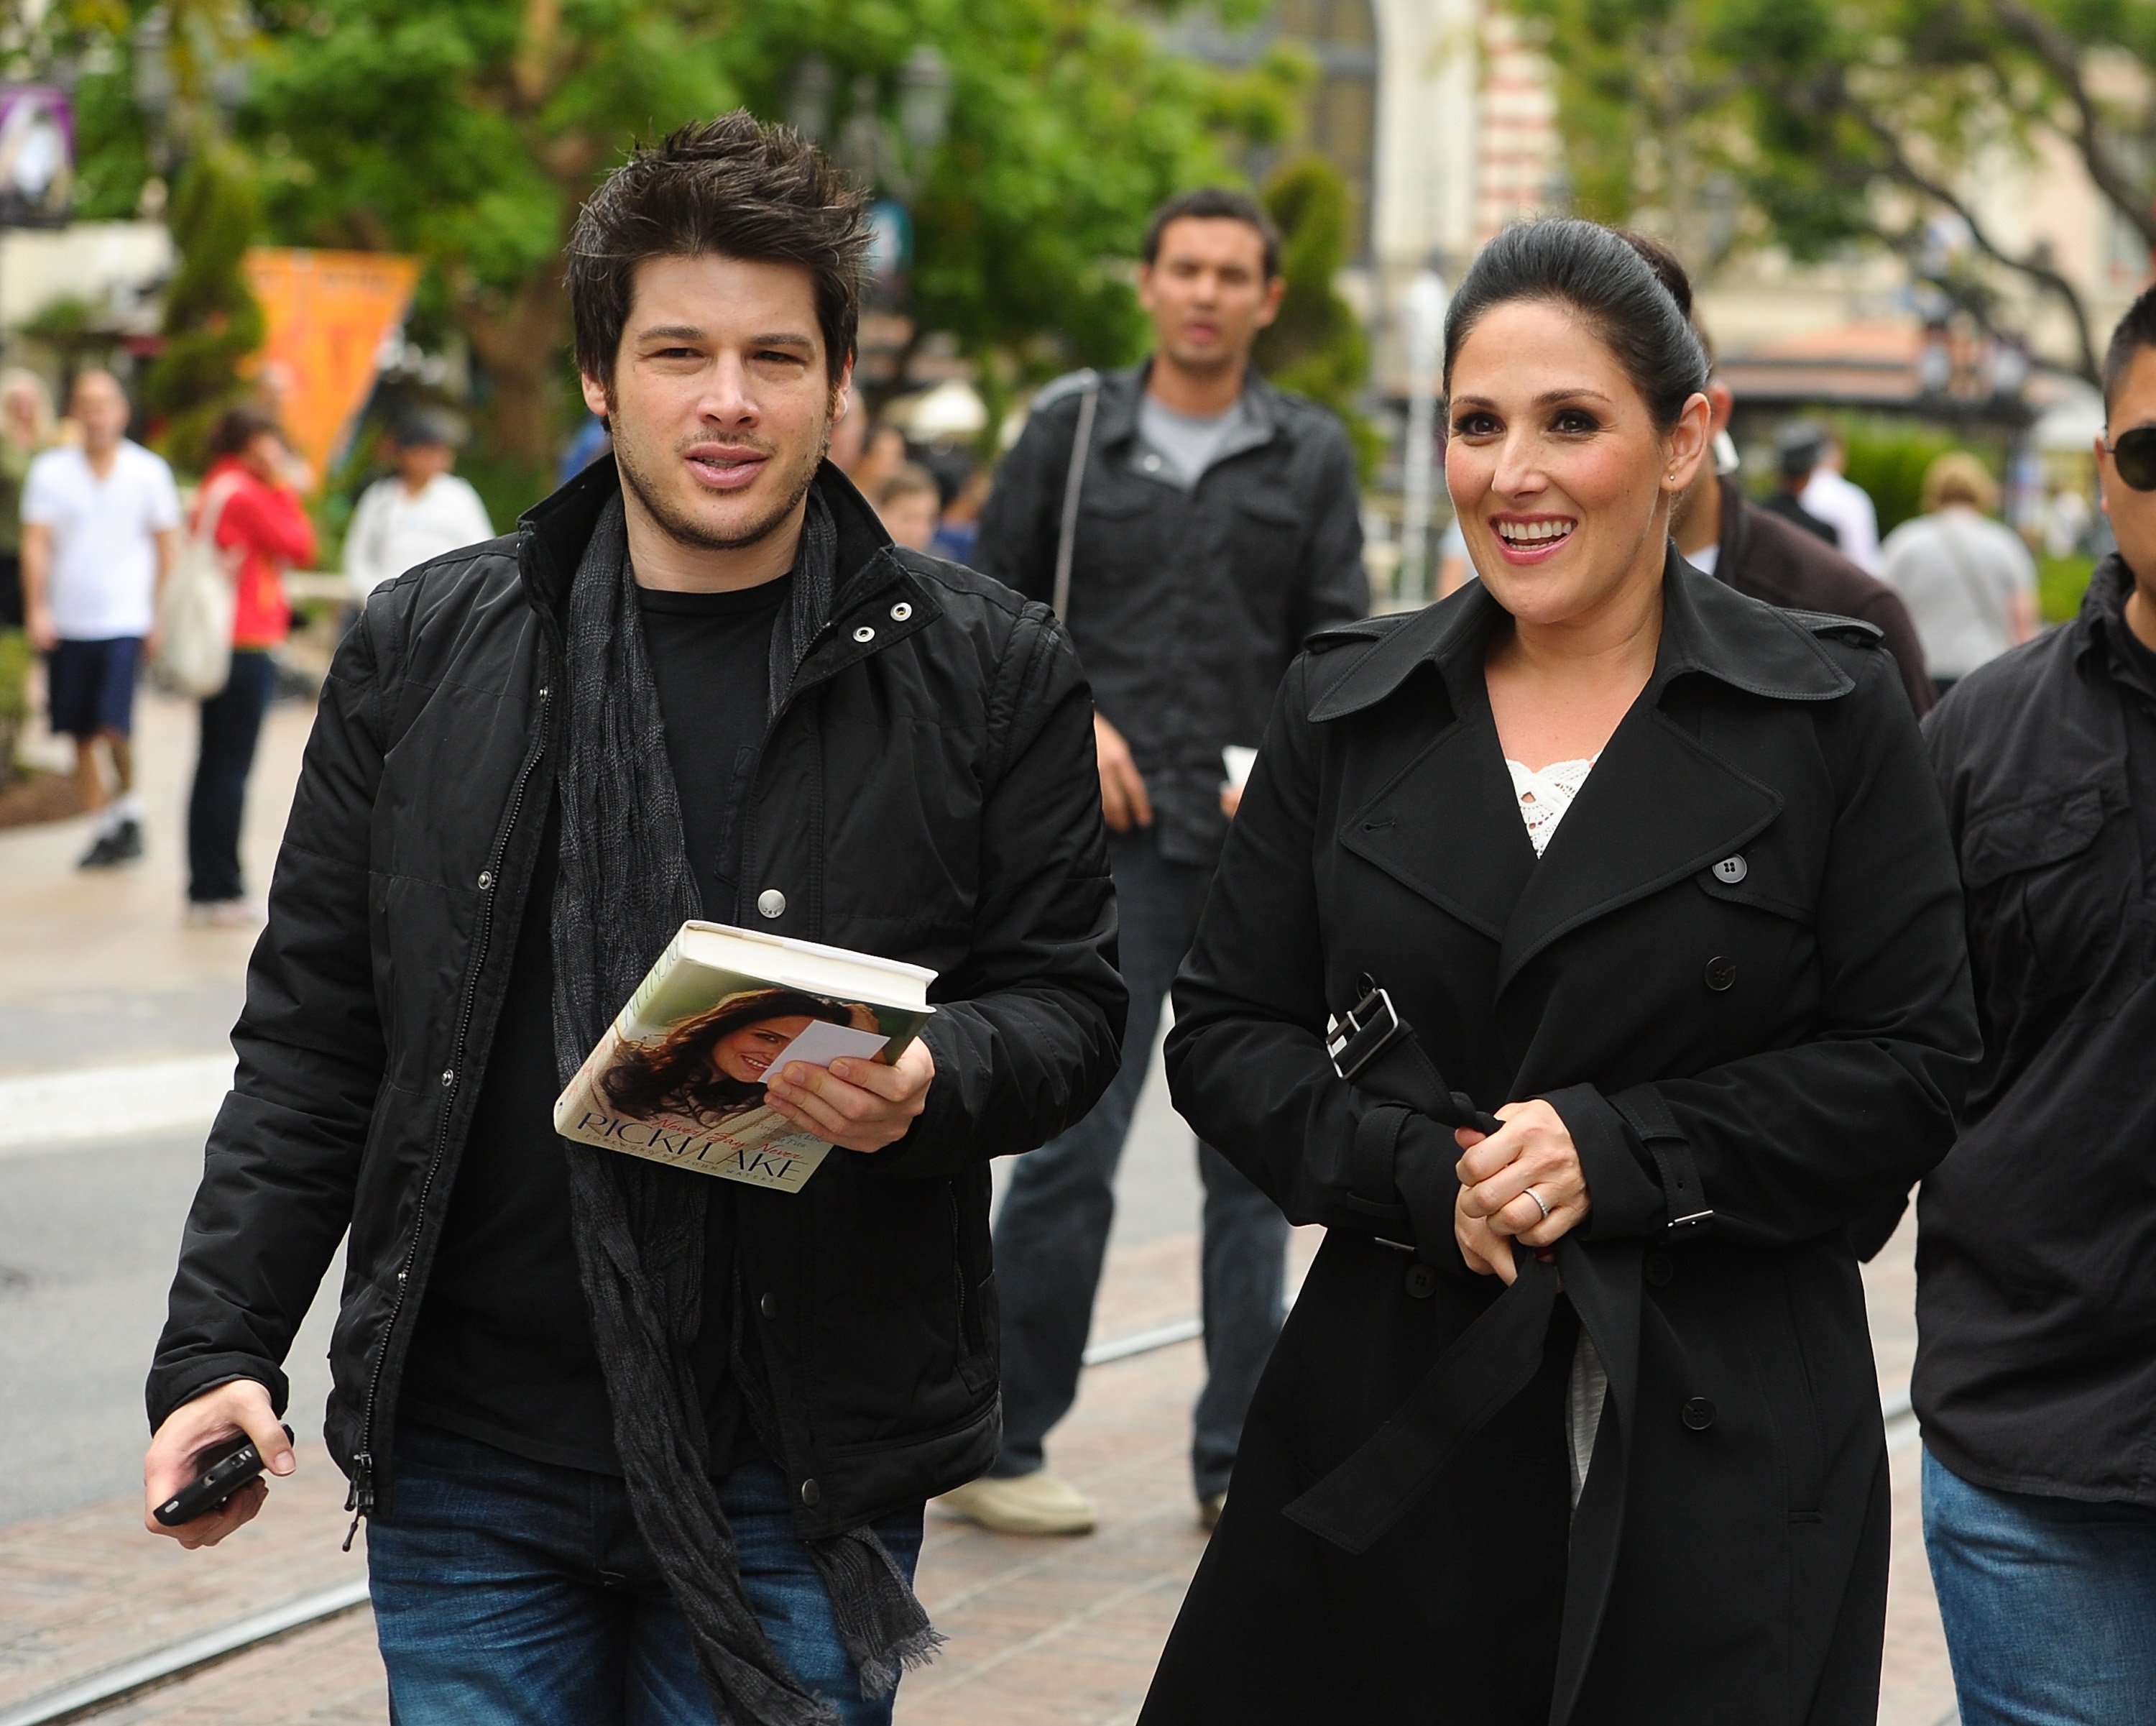 Ricki Lake and Christian Evans are sighted at The Grove on April 23, 2012 in Los Angeles, California | Photo: Getty Images